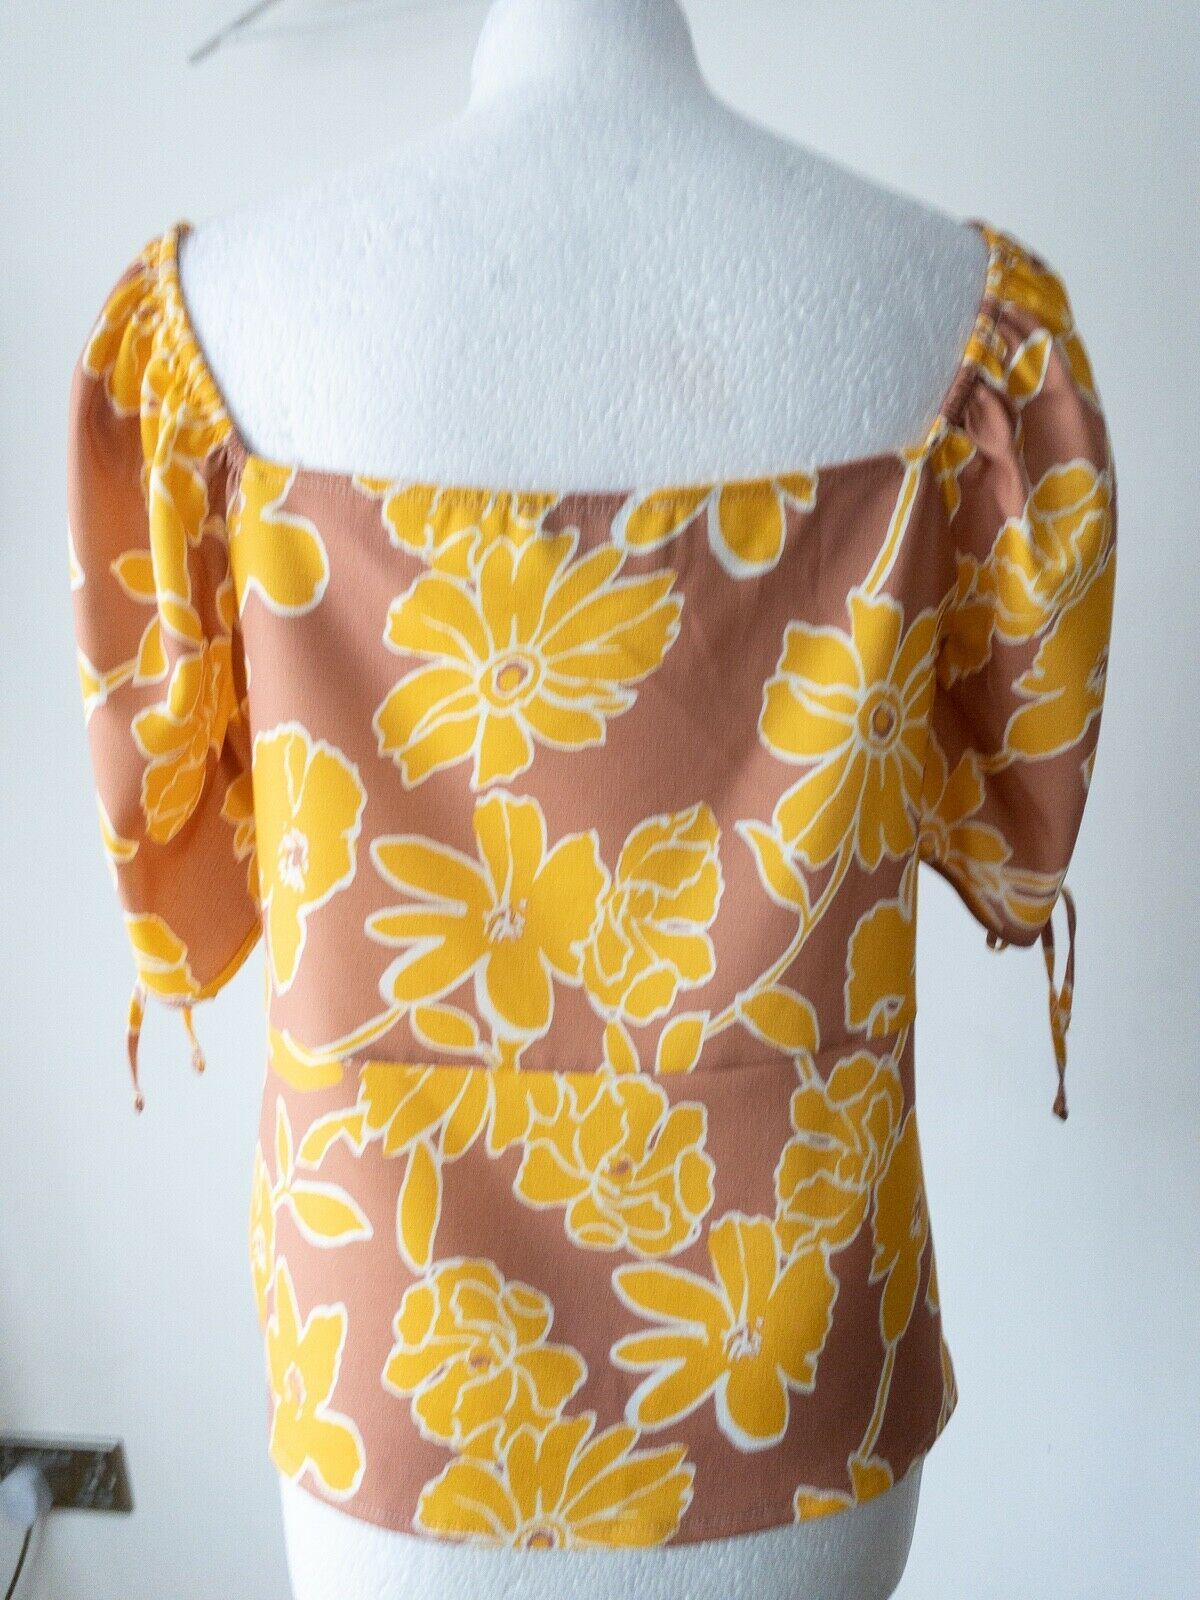 Yellow and Brown Floral Blouse V-Neck Size 10 Vintage Retro Print - Beagle Boutique Fashion Outlet